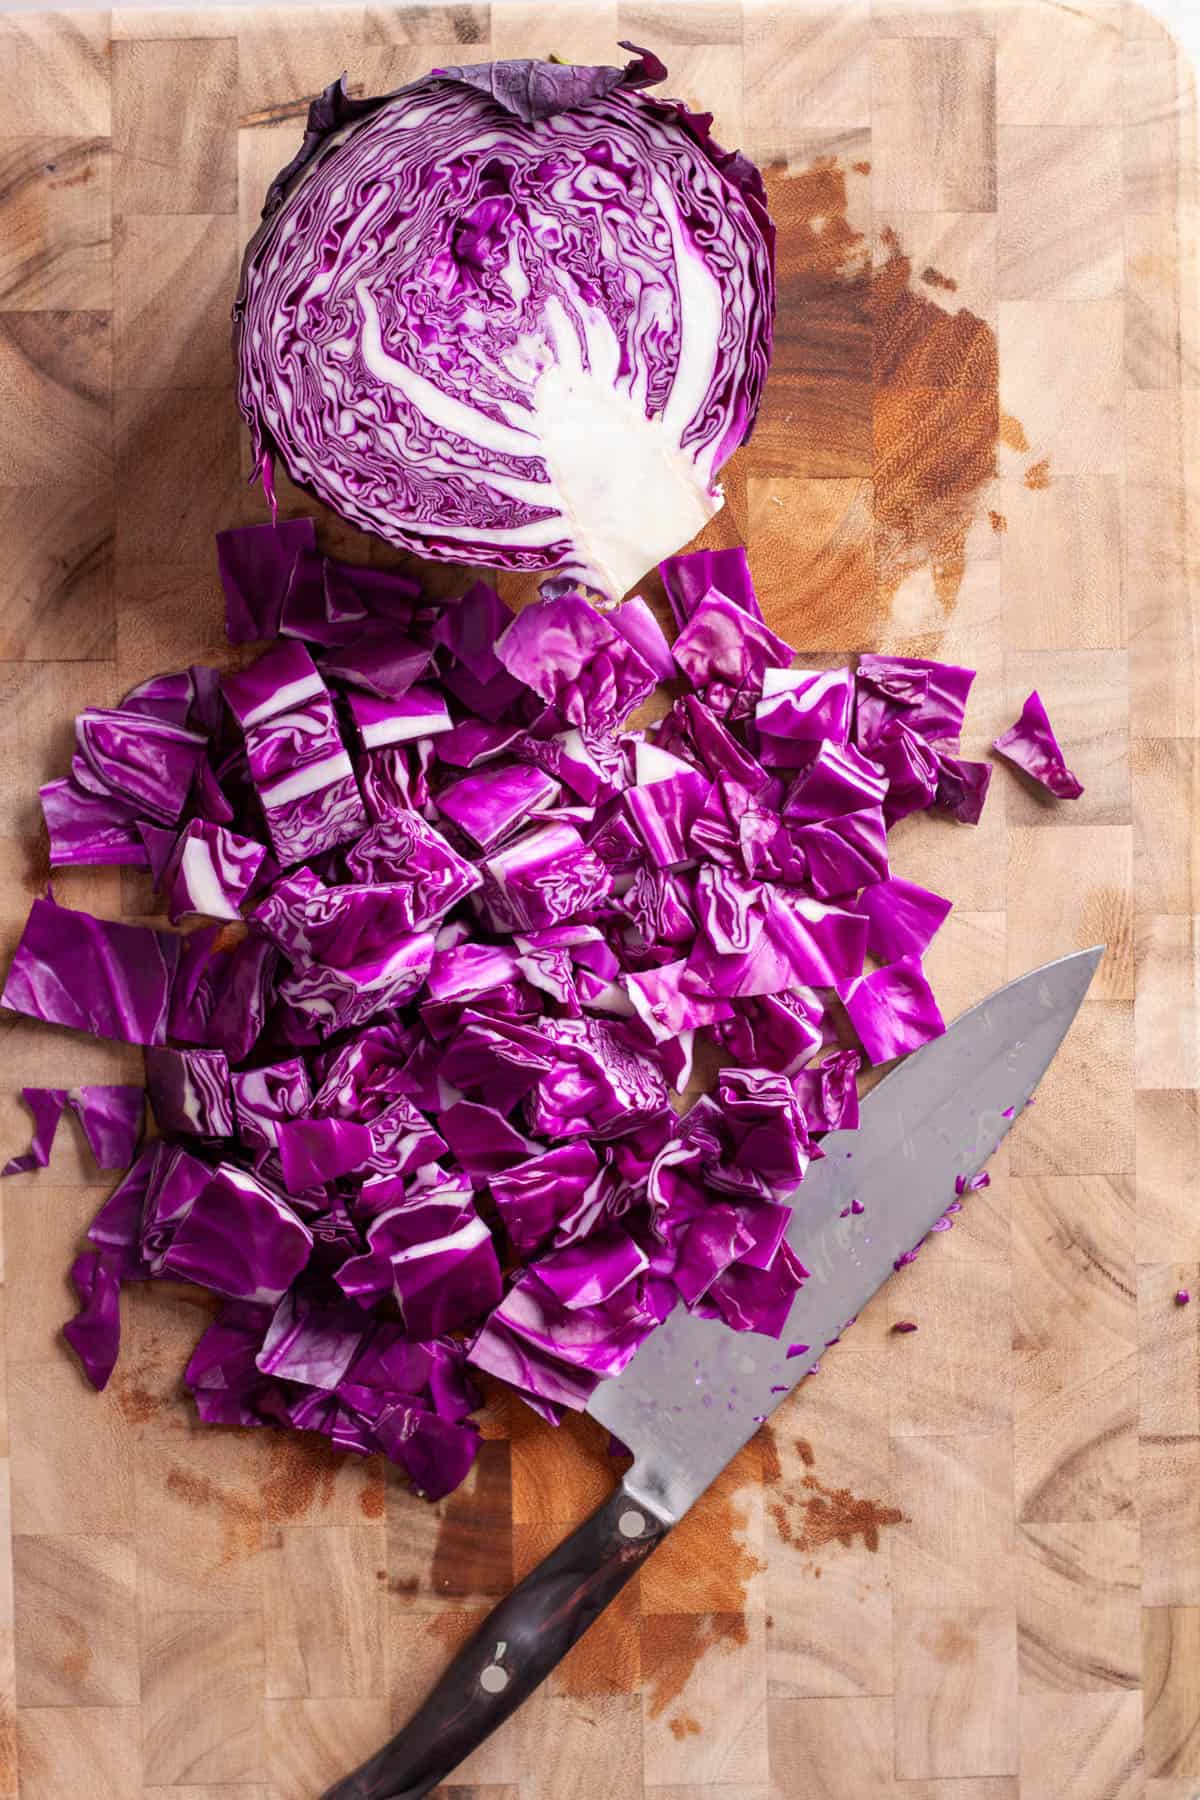 Red cabbage roughly chopped on a butcherblock cutting board.